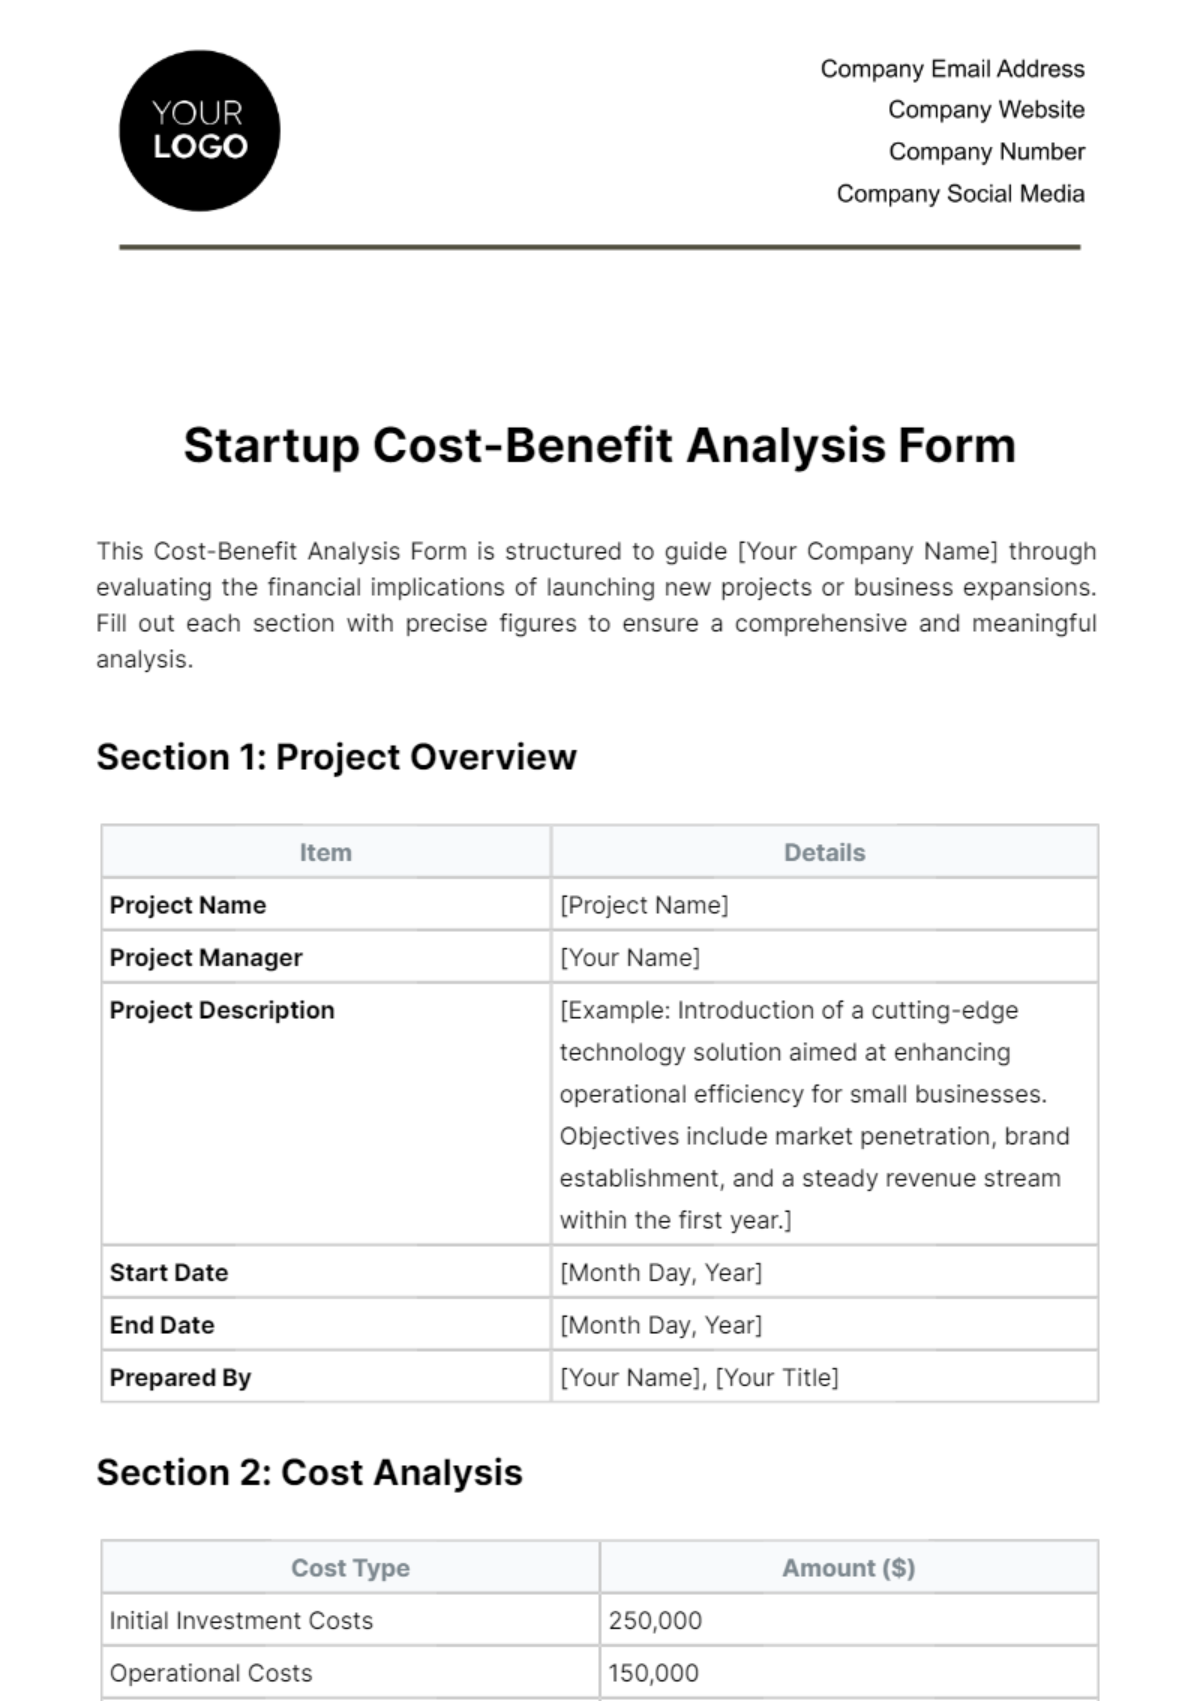 Free Startup Cost-Benefit Analysis Form Template